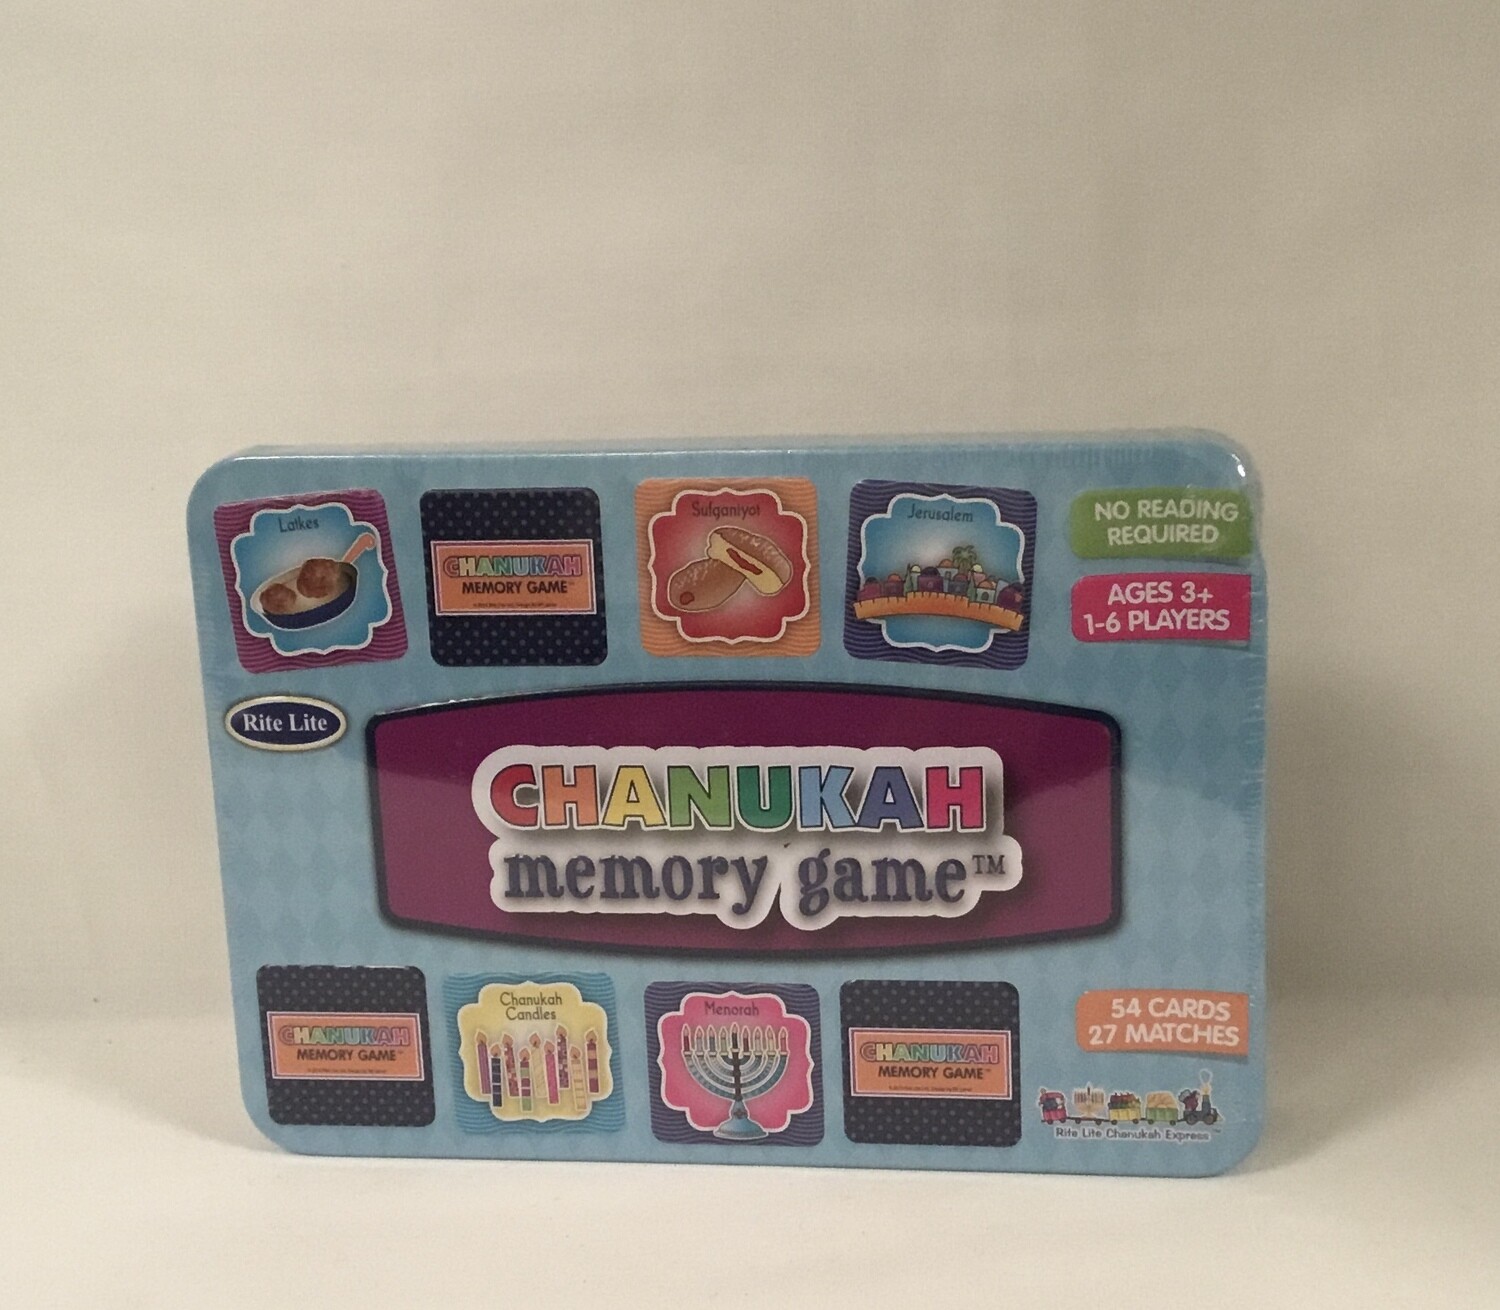 Chanukah Memory Game in a Collectable Tin